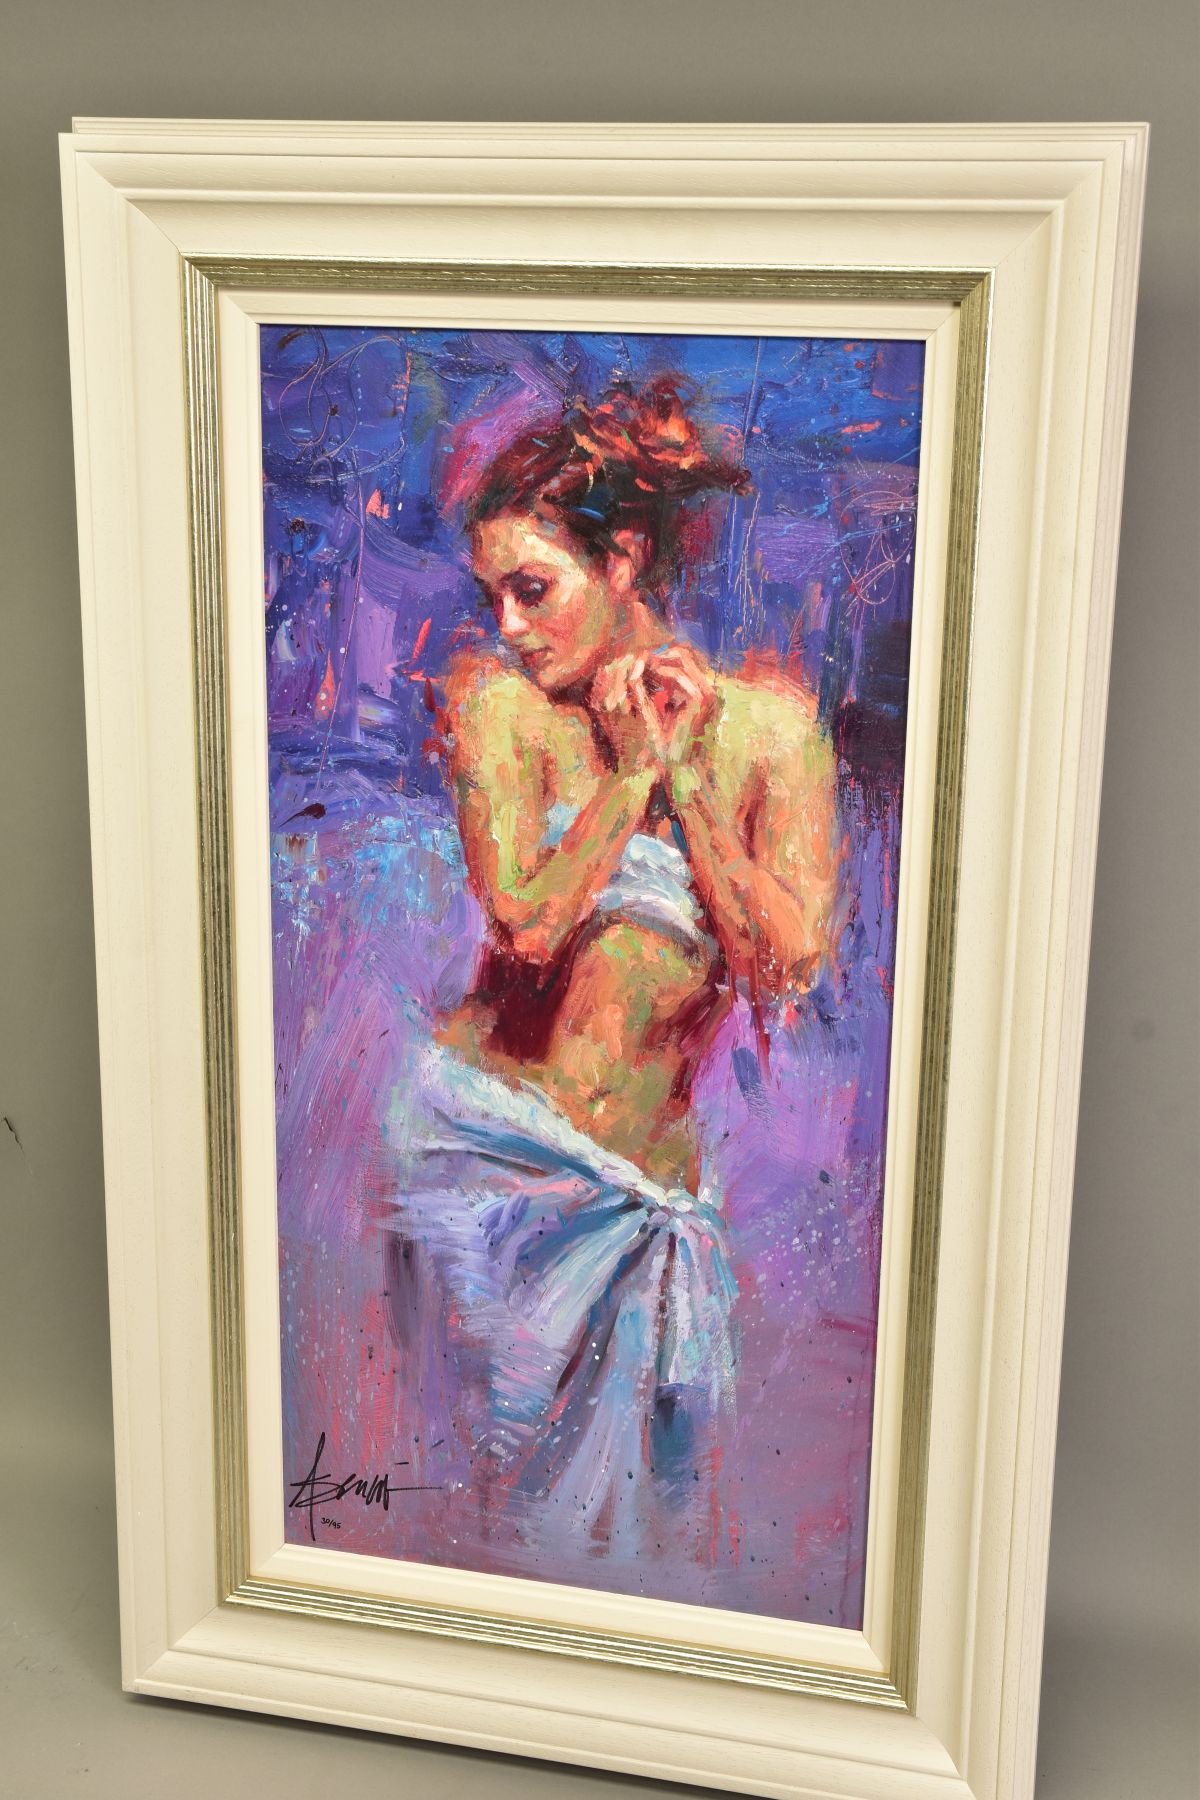 HENRY ASENICO (AMERICAN 1971), a limited edition print of a female figure 30/95, signed bottom left, - Image 7 of 10